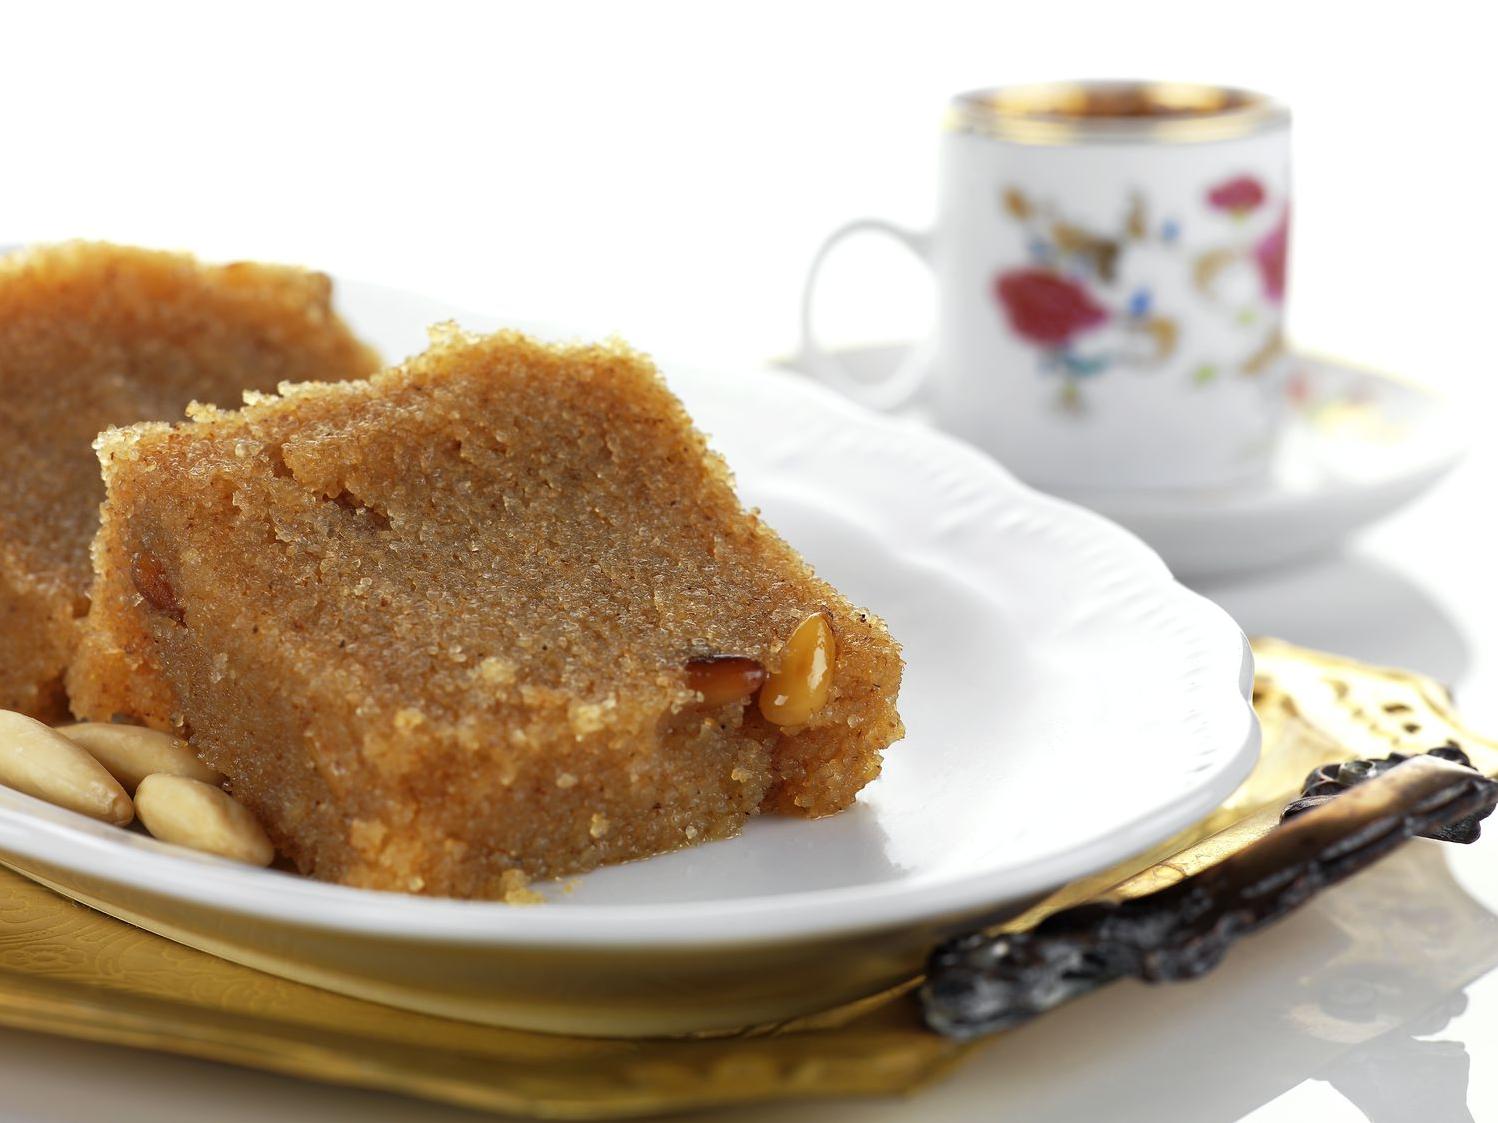  Satisfy your sweet tooth cravings with this simple yet delicious Greek halva with almonds.